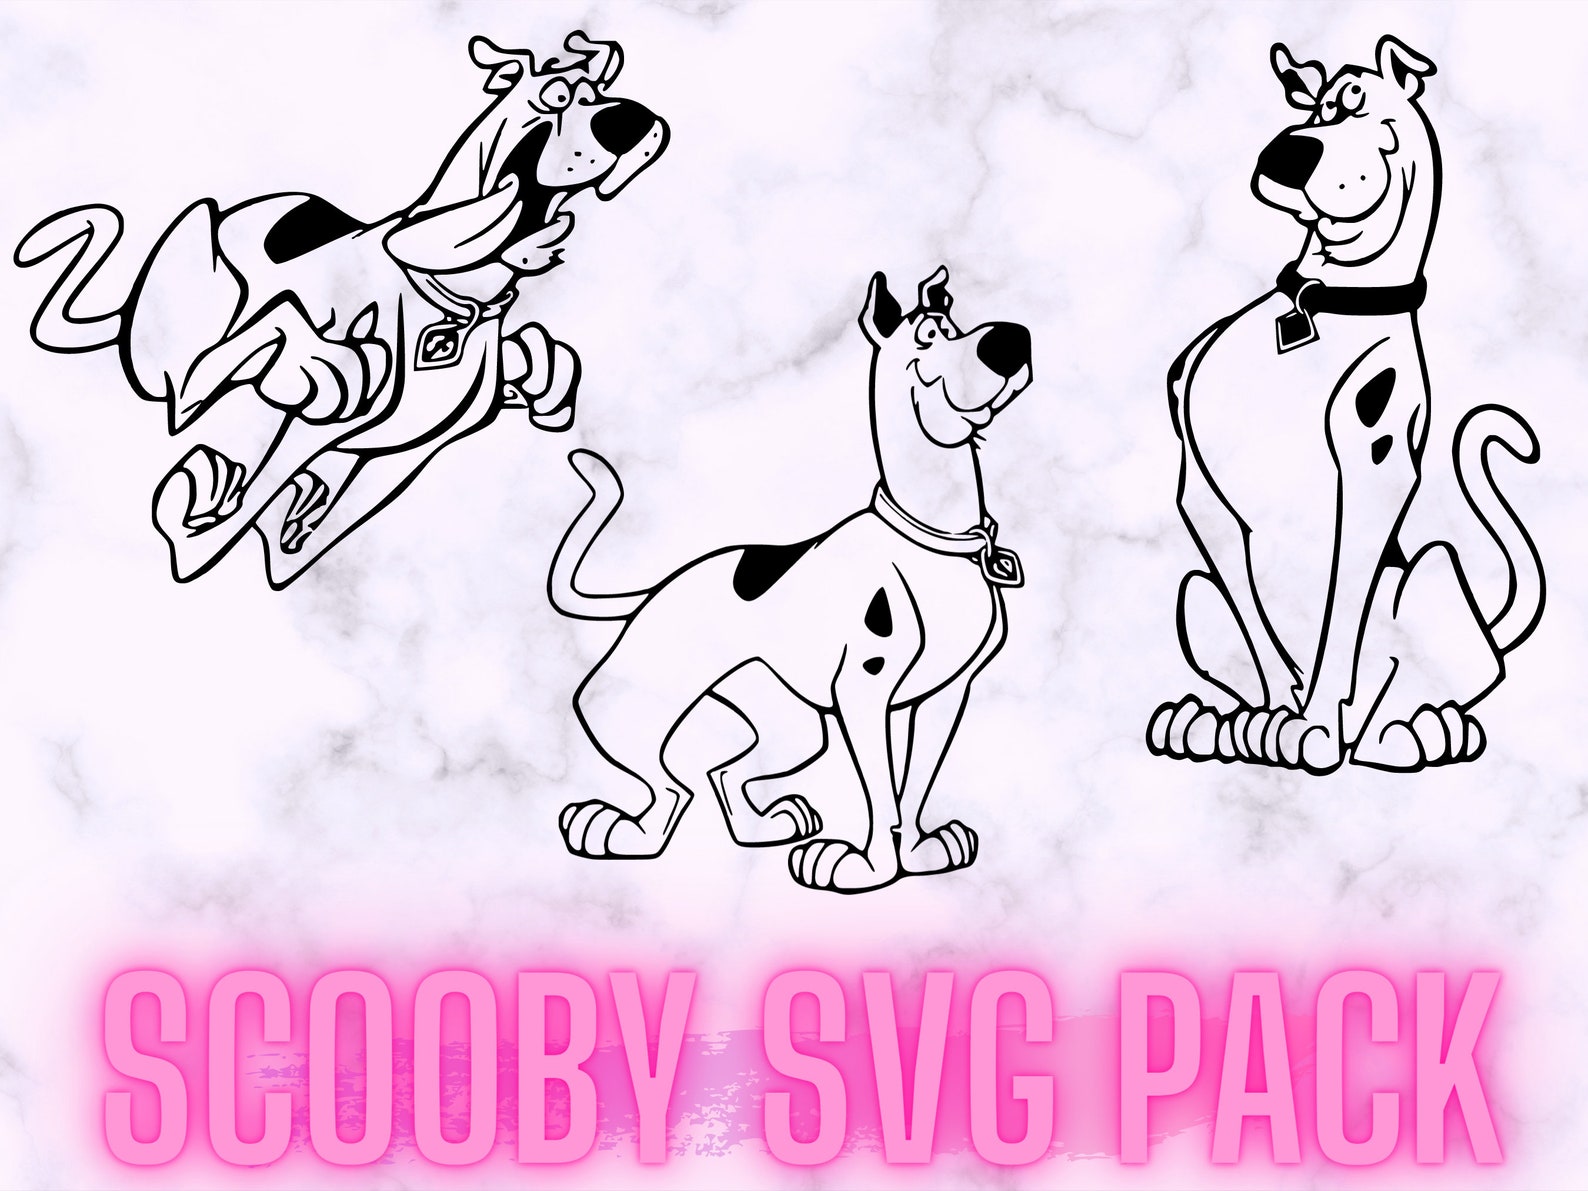 Scooby Doo SVG pack for cricut products | Etsy